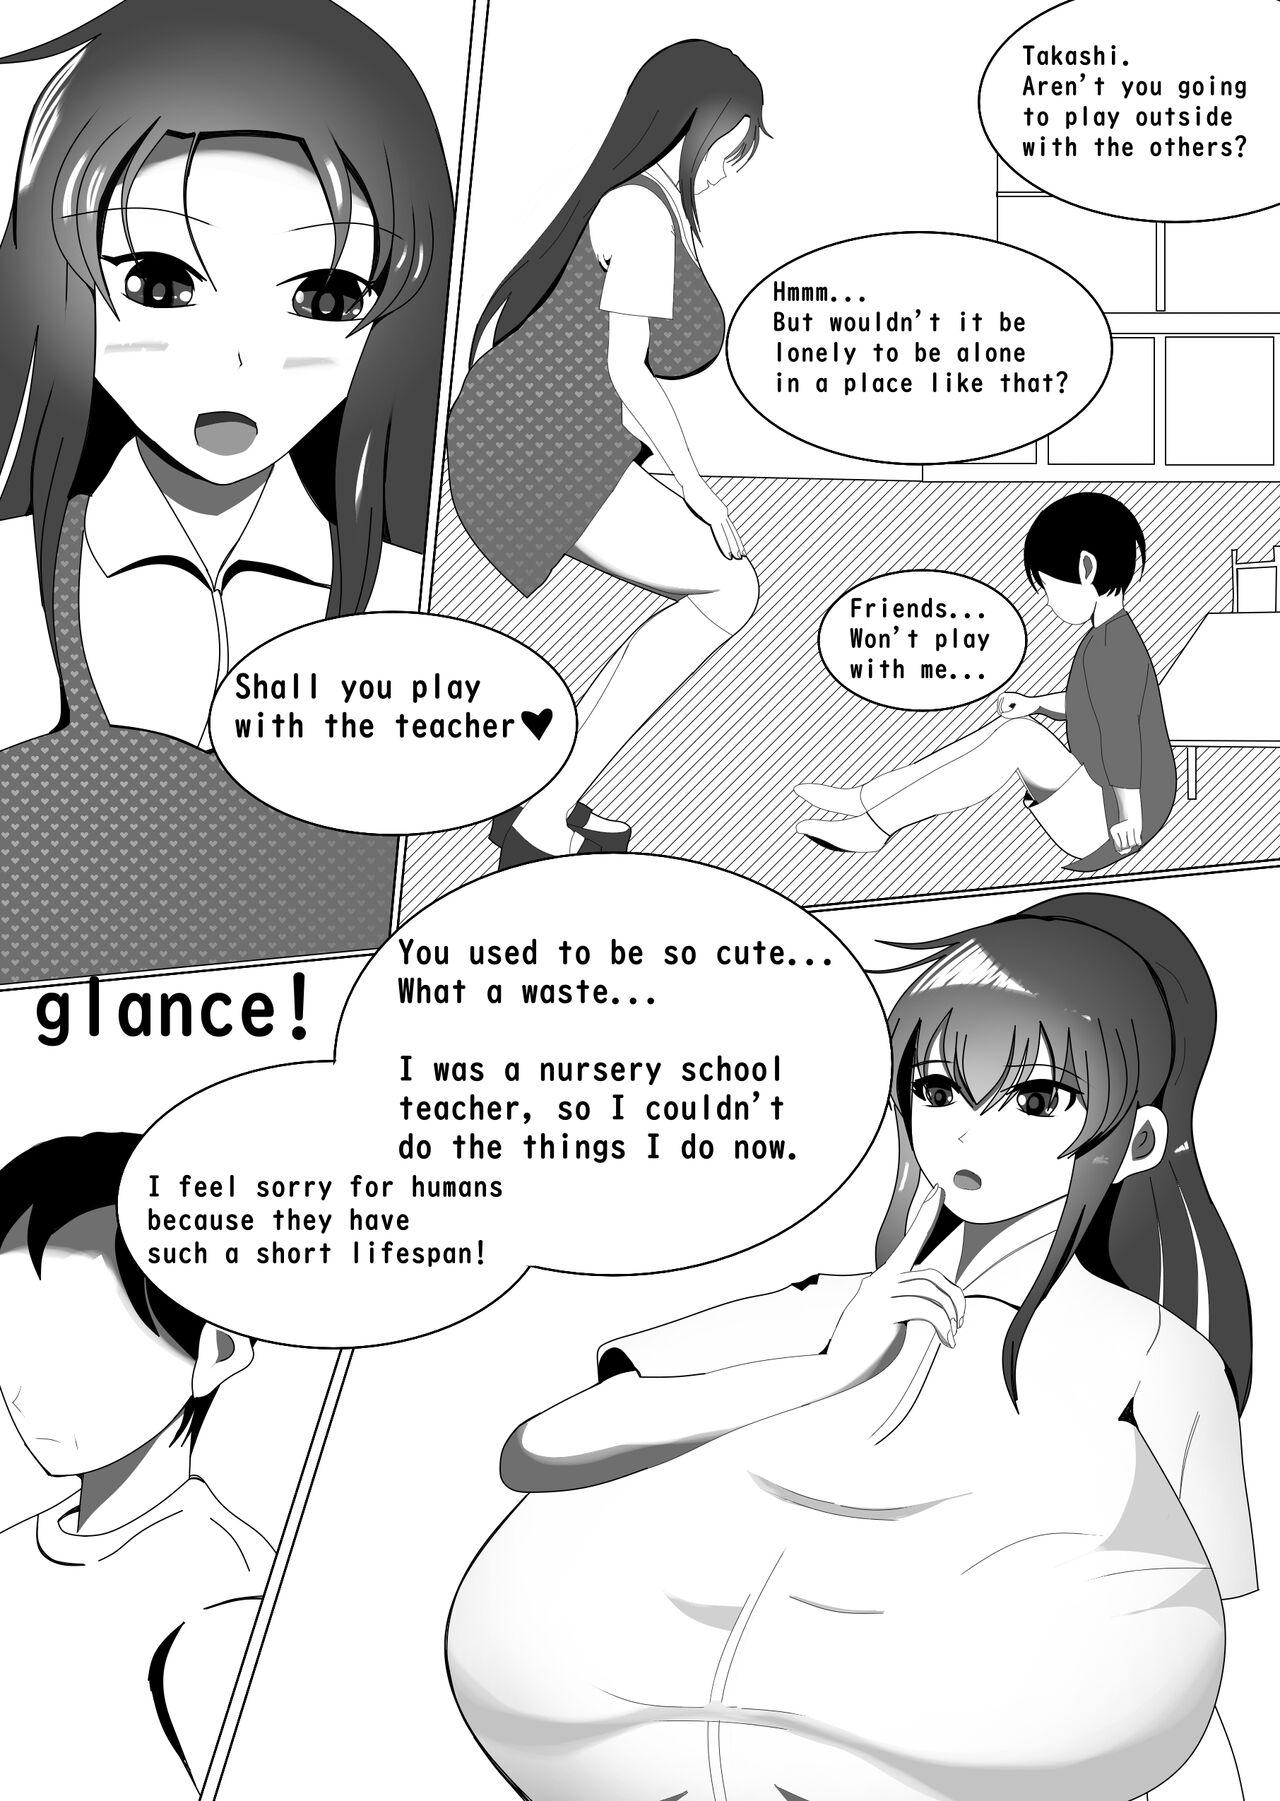 Gagging Unemployed, Back In The Womb Vietnam - Page 2